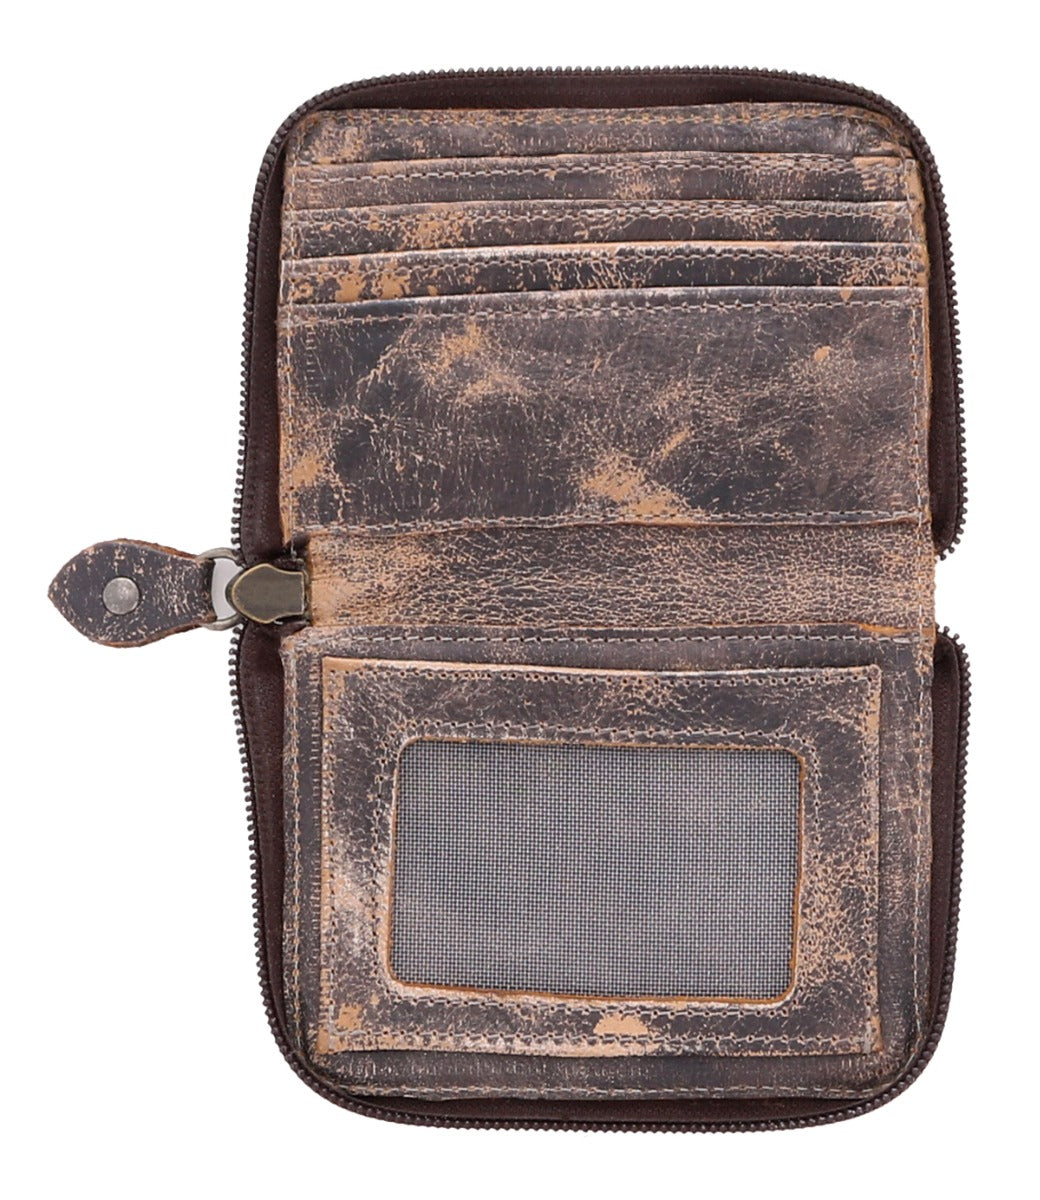 A brown leather Ozzie wallet with a zipper from Bed Stu.